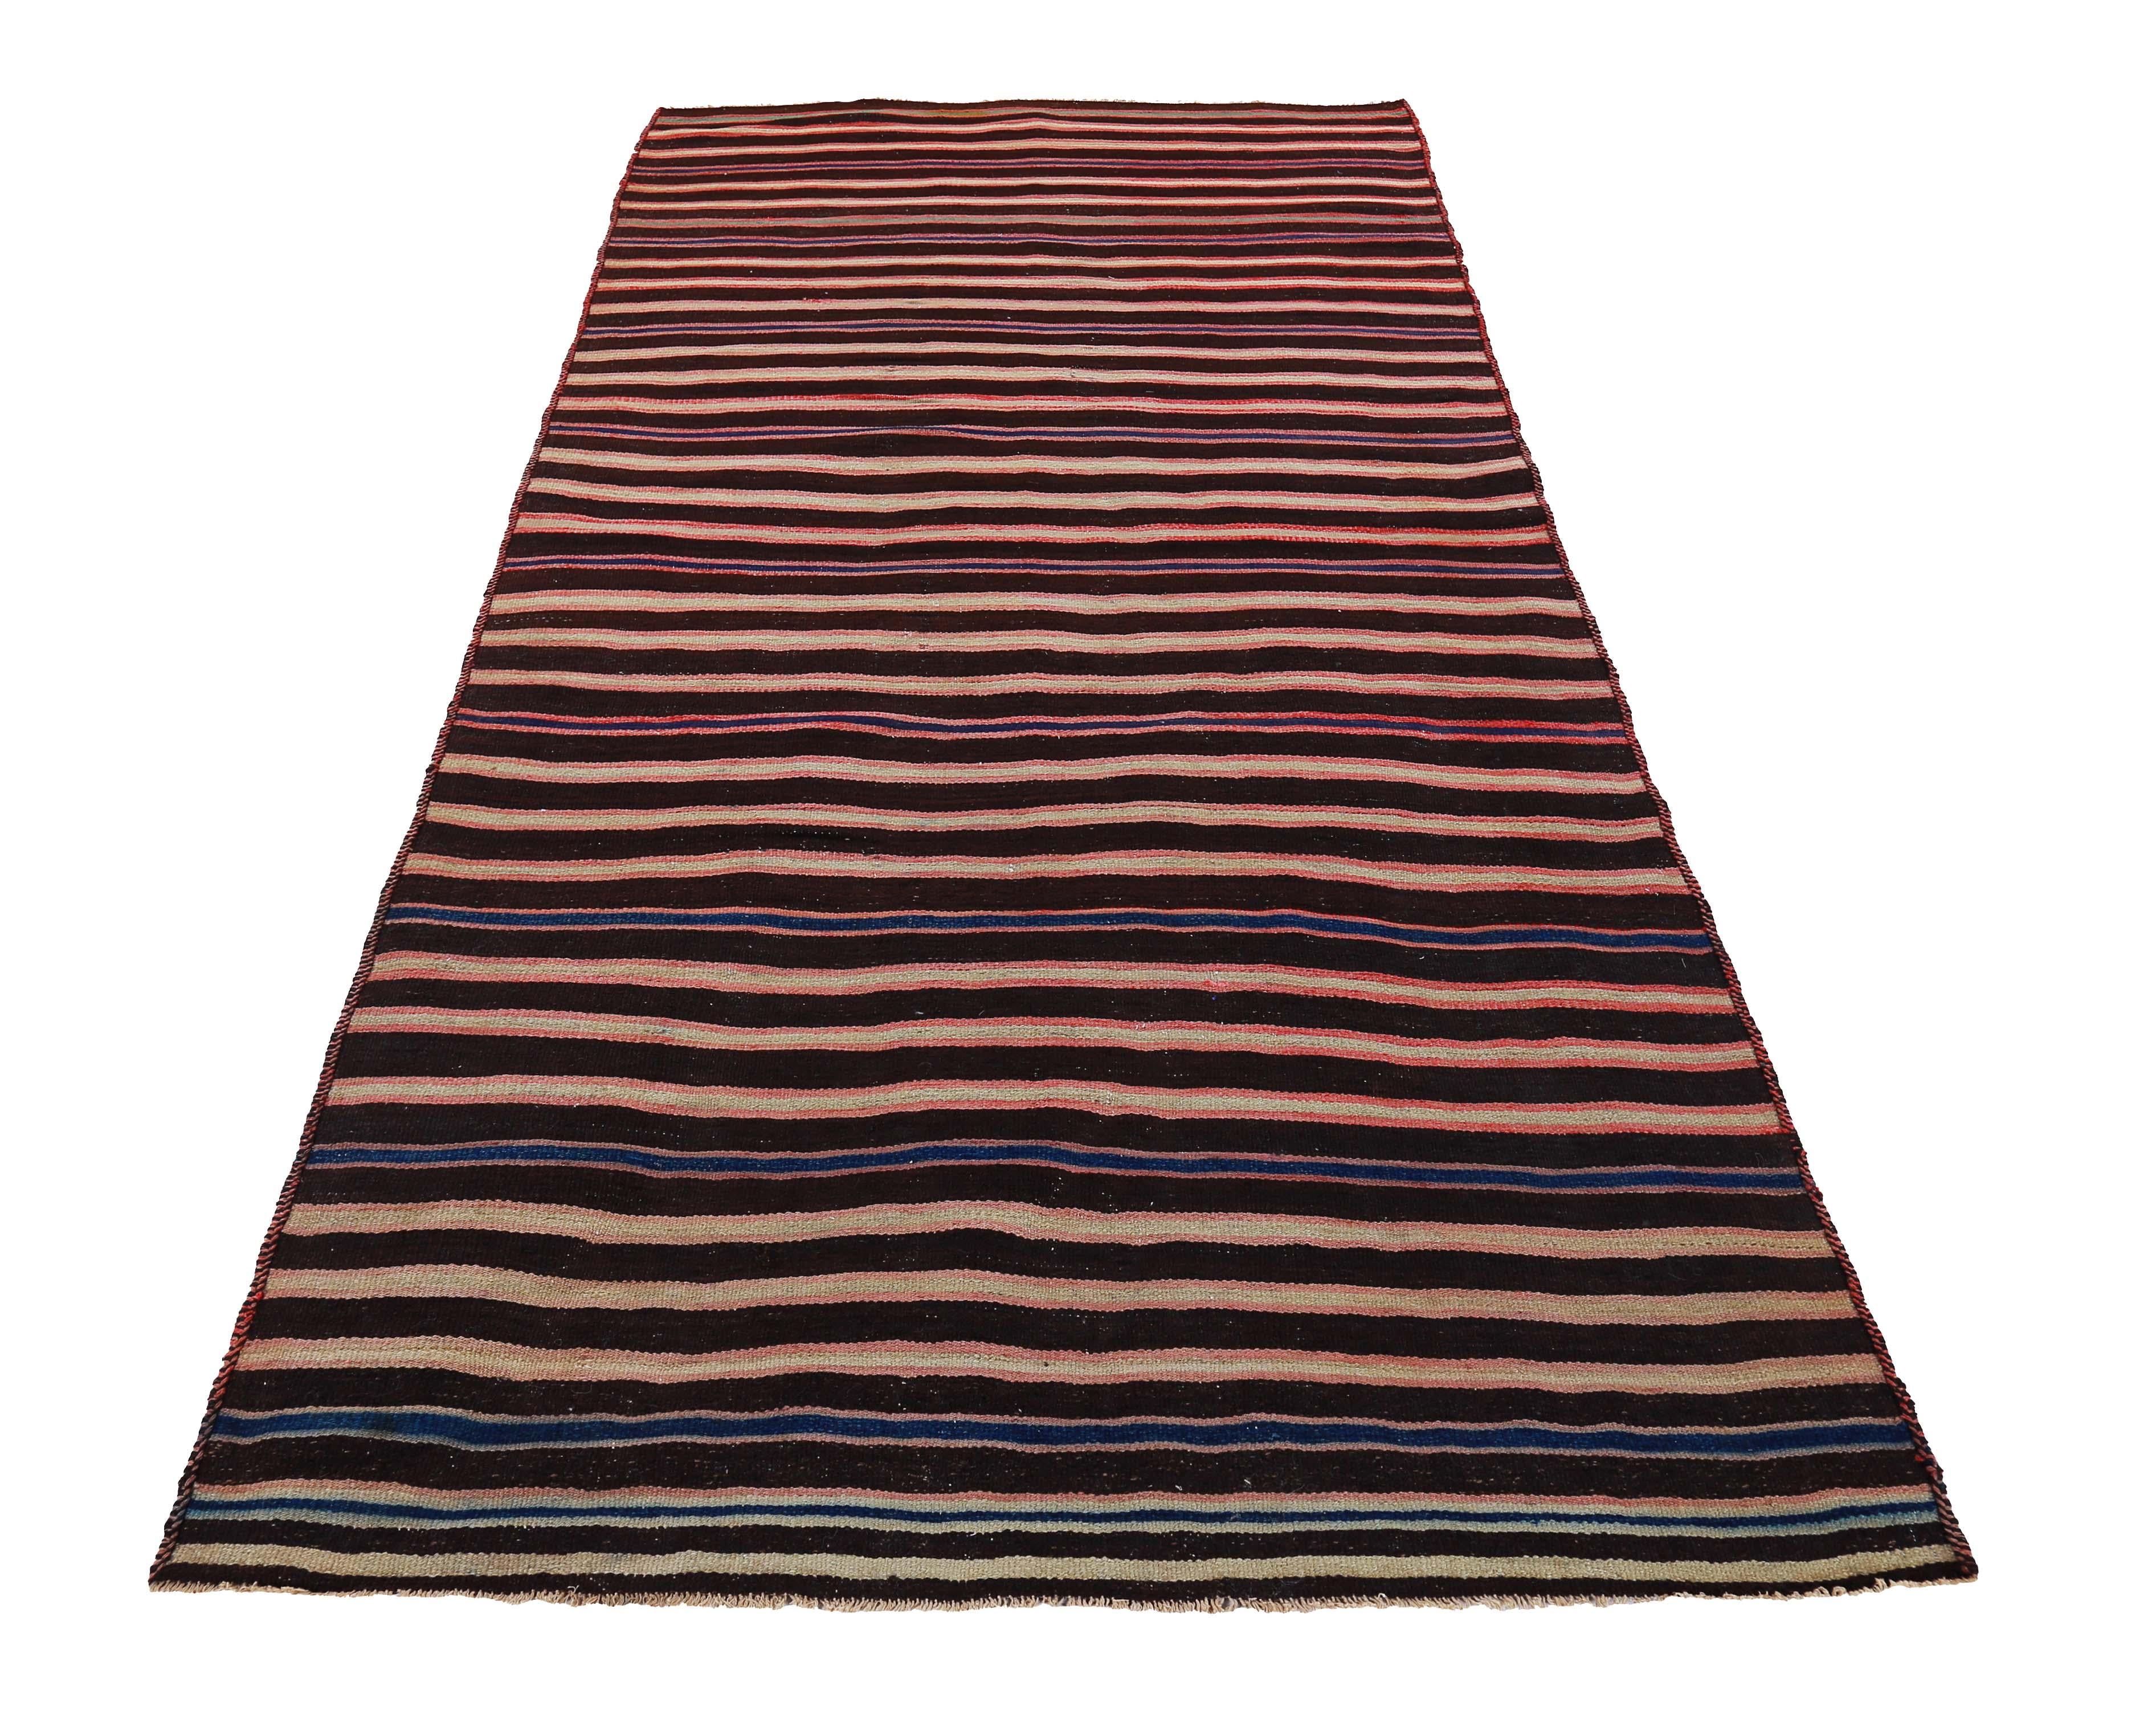 Turkish rug handwoven from the finest sheep’s wool and colored with all-natural vegetable dyes that are safe for humans and pets. It’s a traditional Kilim flat-weave design featuring red, beige and blue tribal stripes. It’s a stunning piece to get